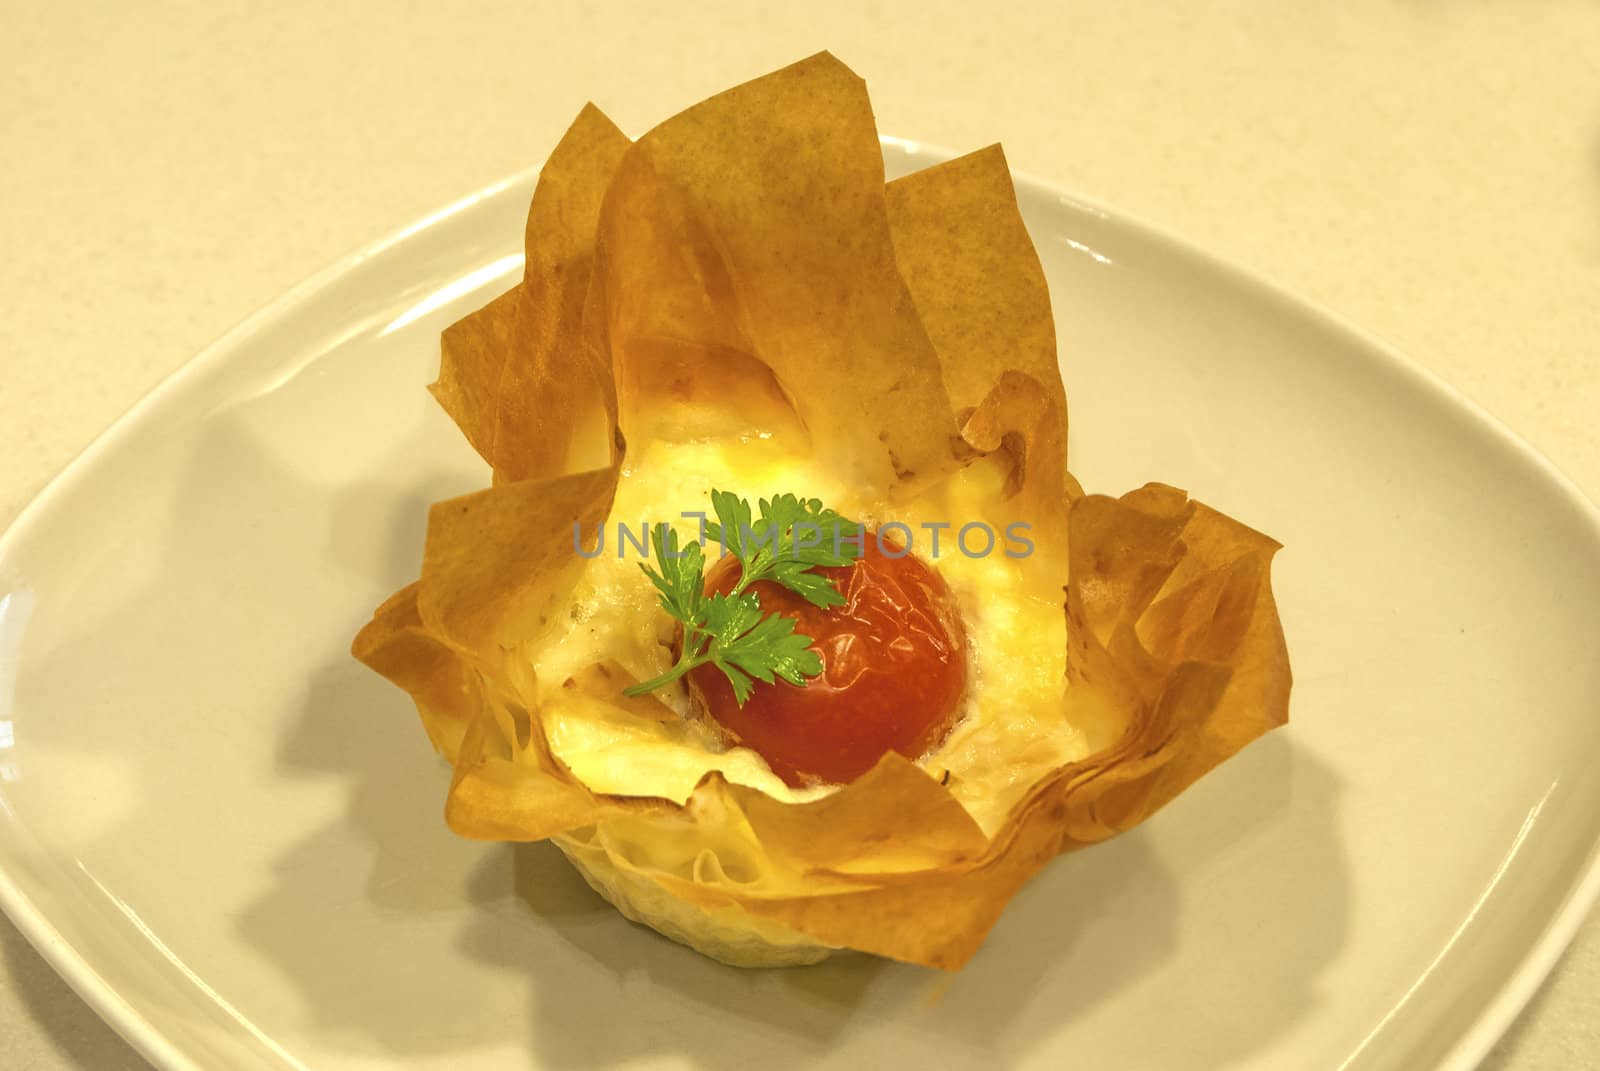 Small homemade pie with cheese and cherry tomato in a basket of pastry